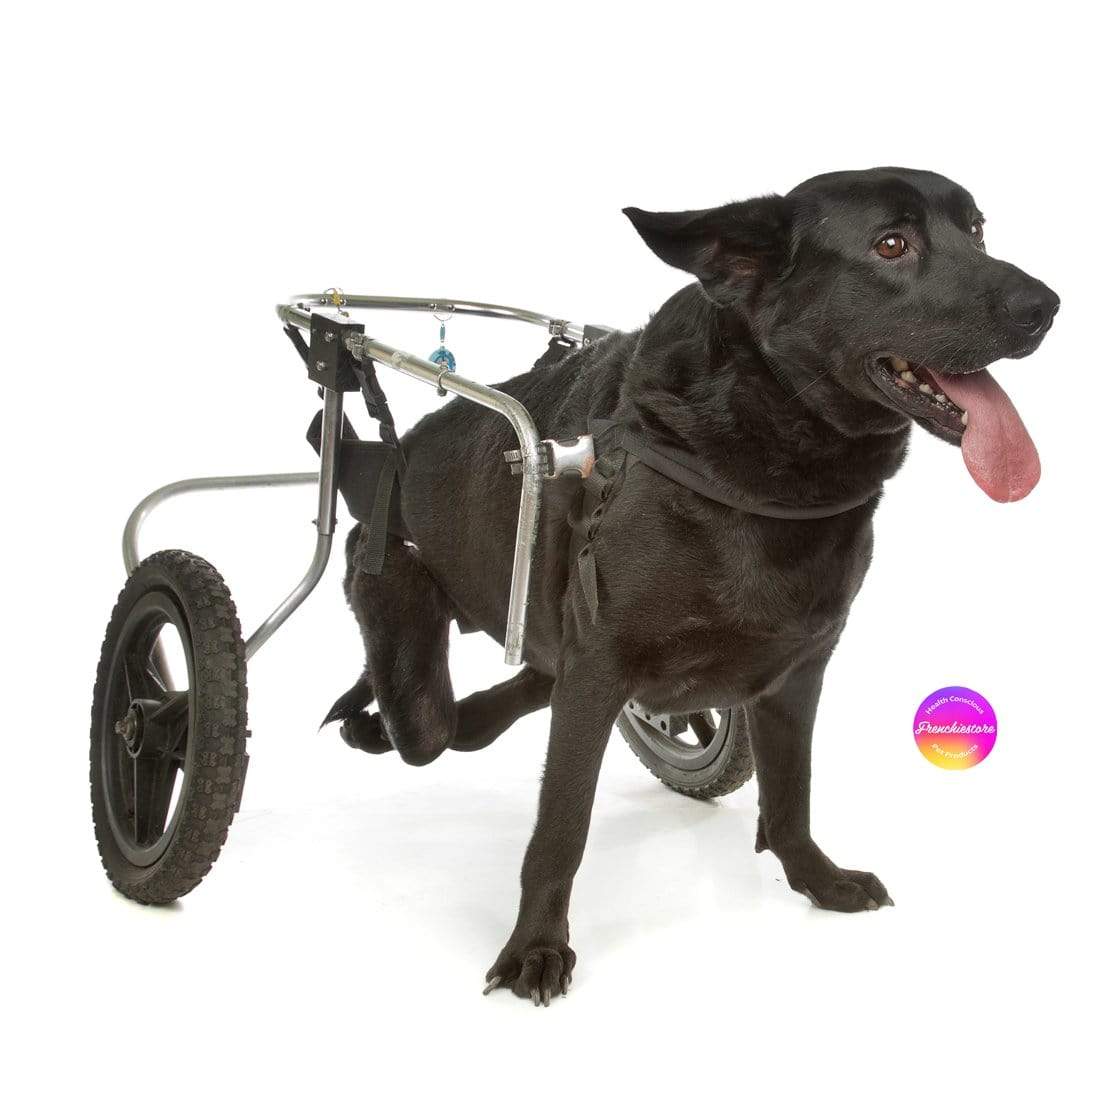 C G Xxx Dog Video - Mobility Issues in dogs